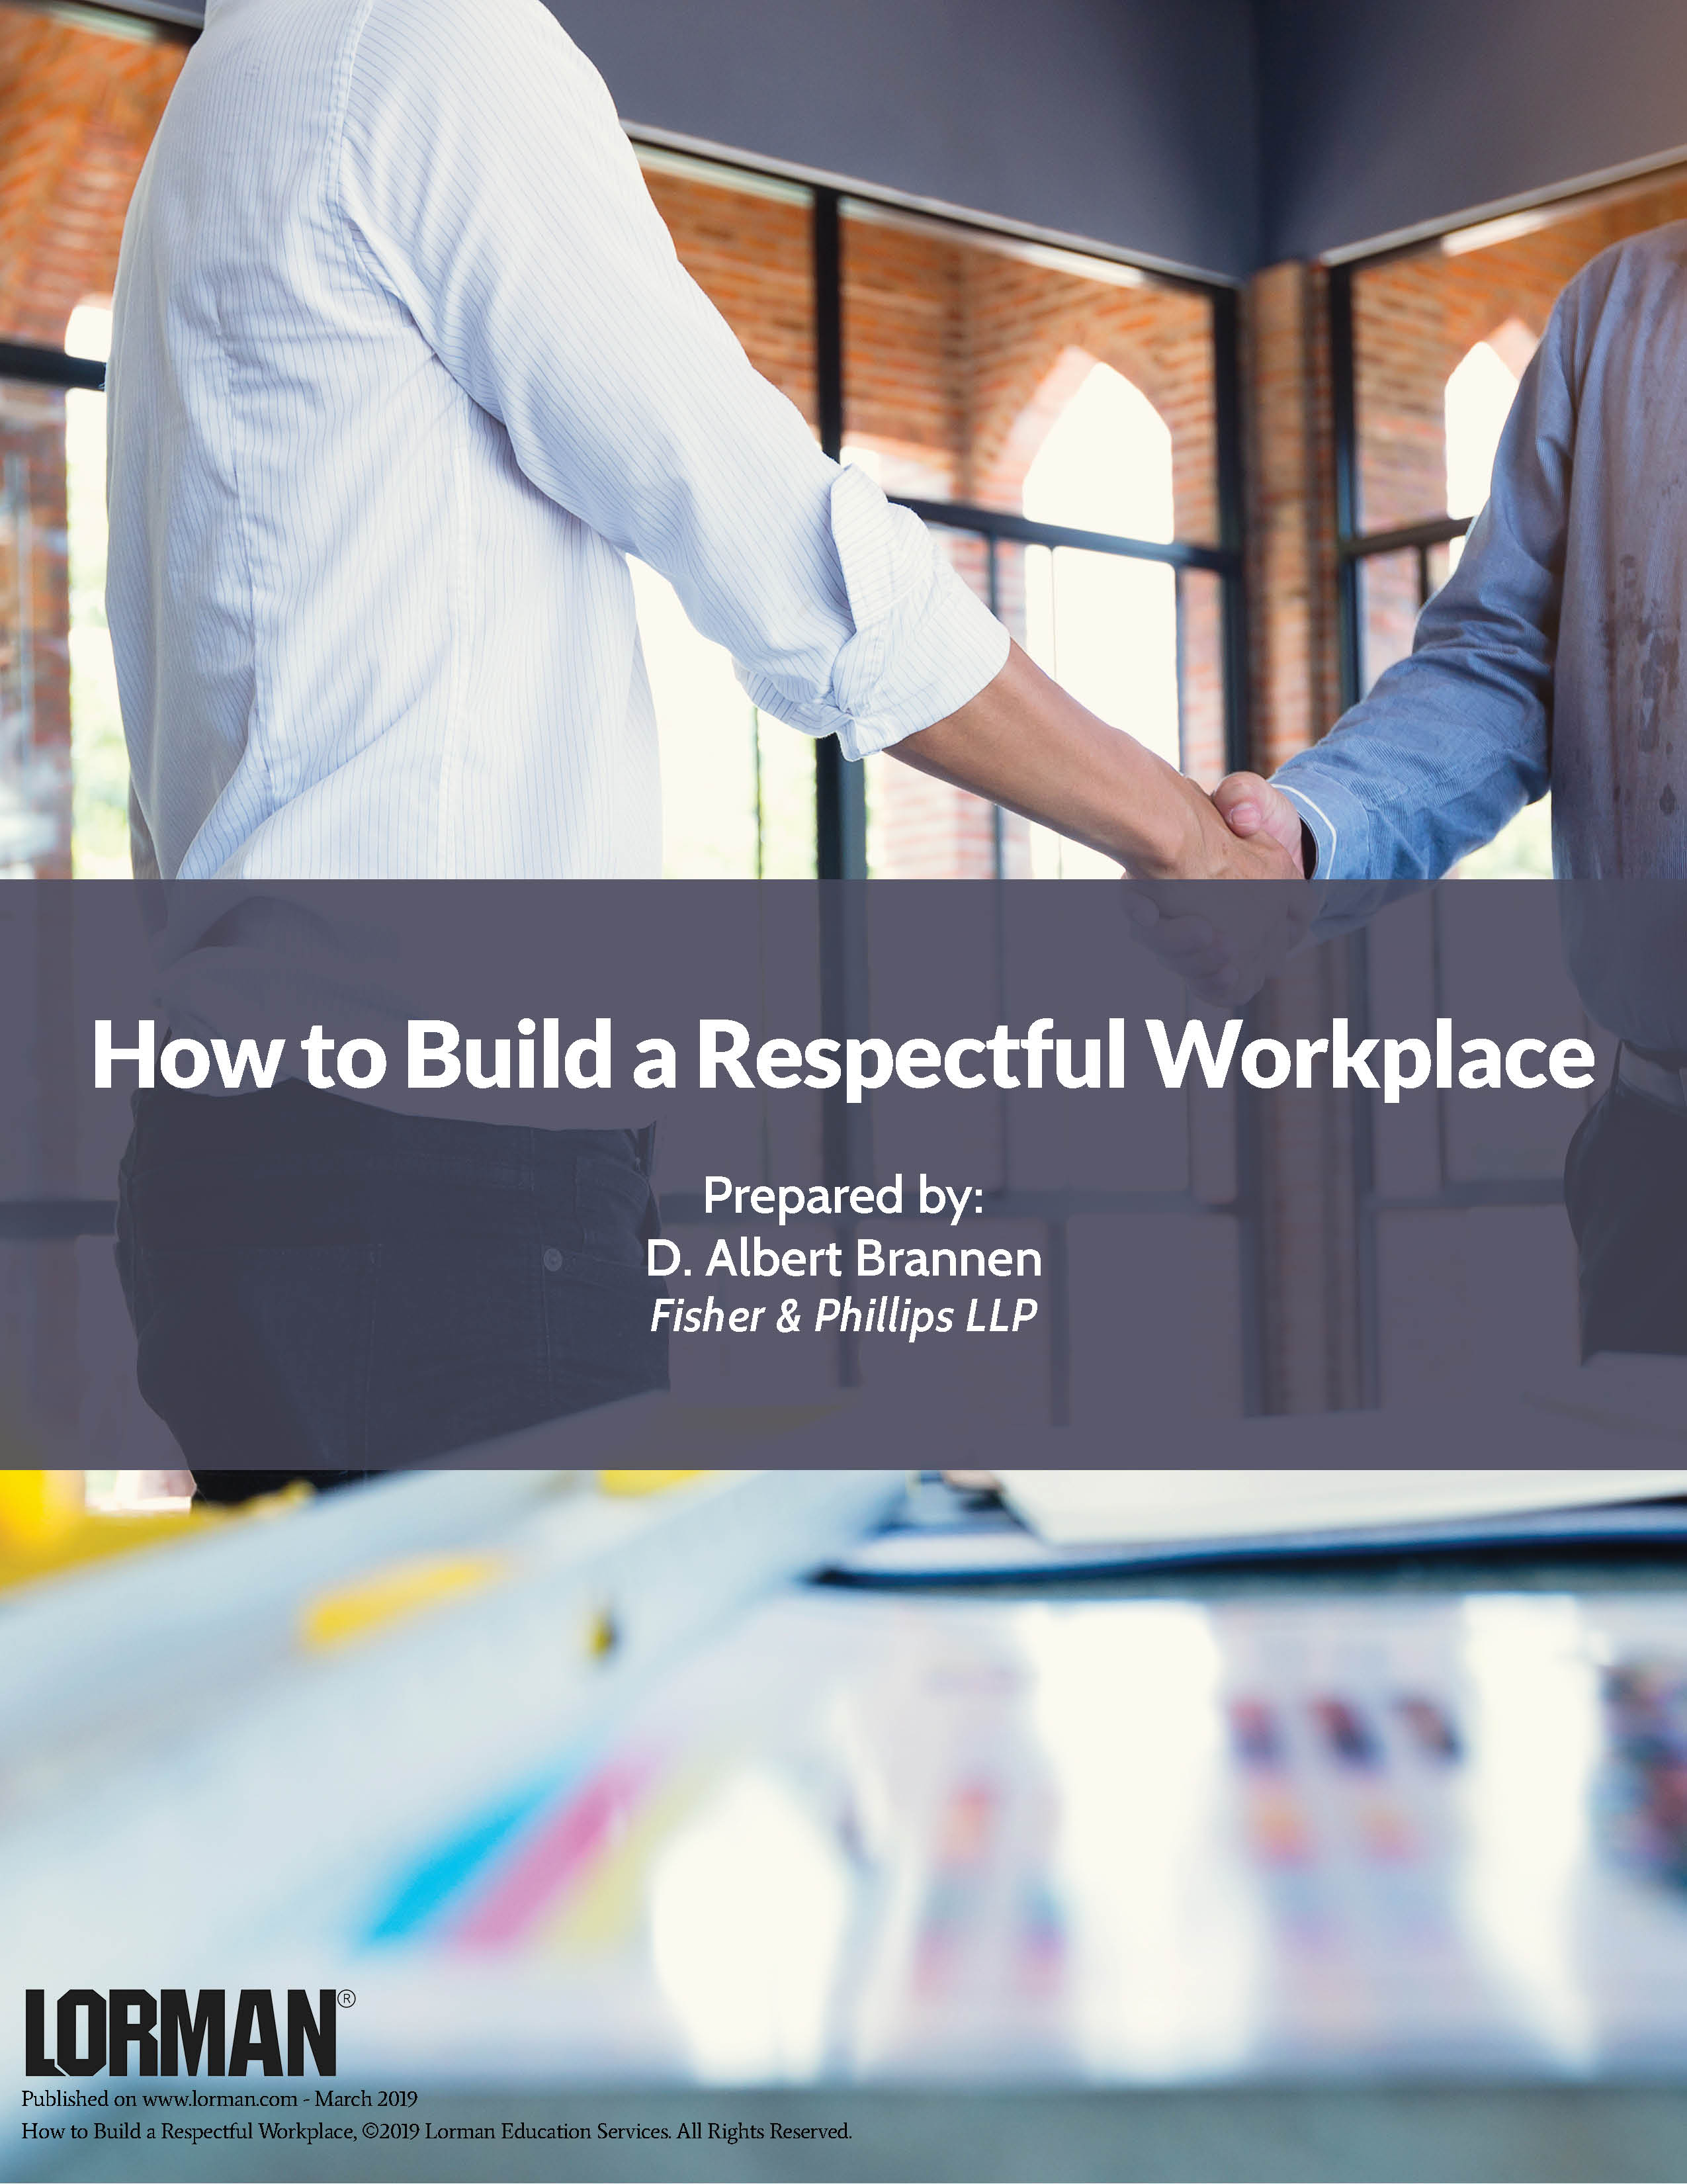 How to Build a Respectful Workplace